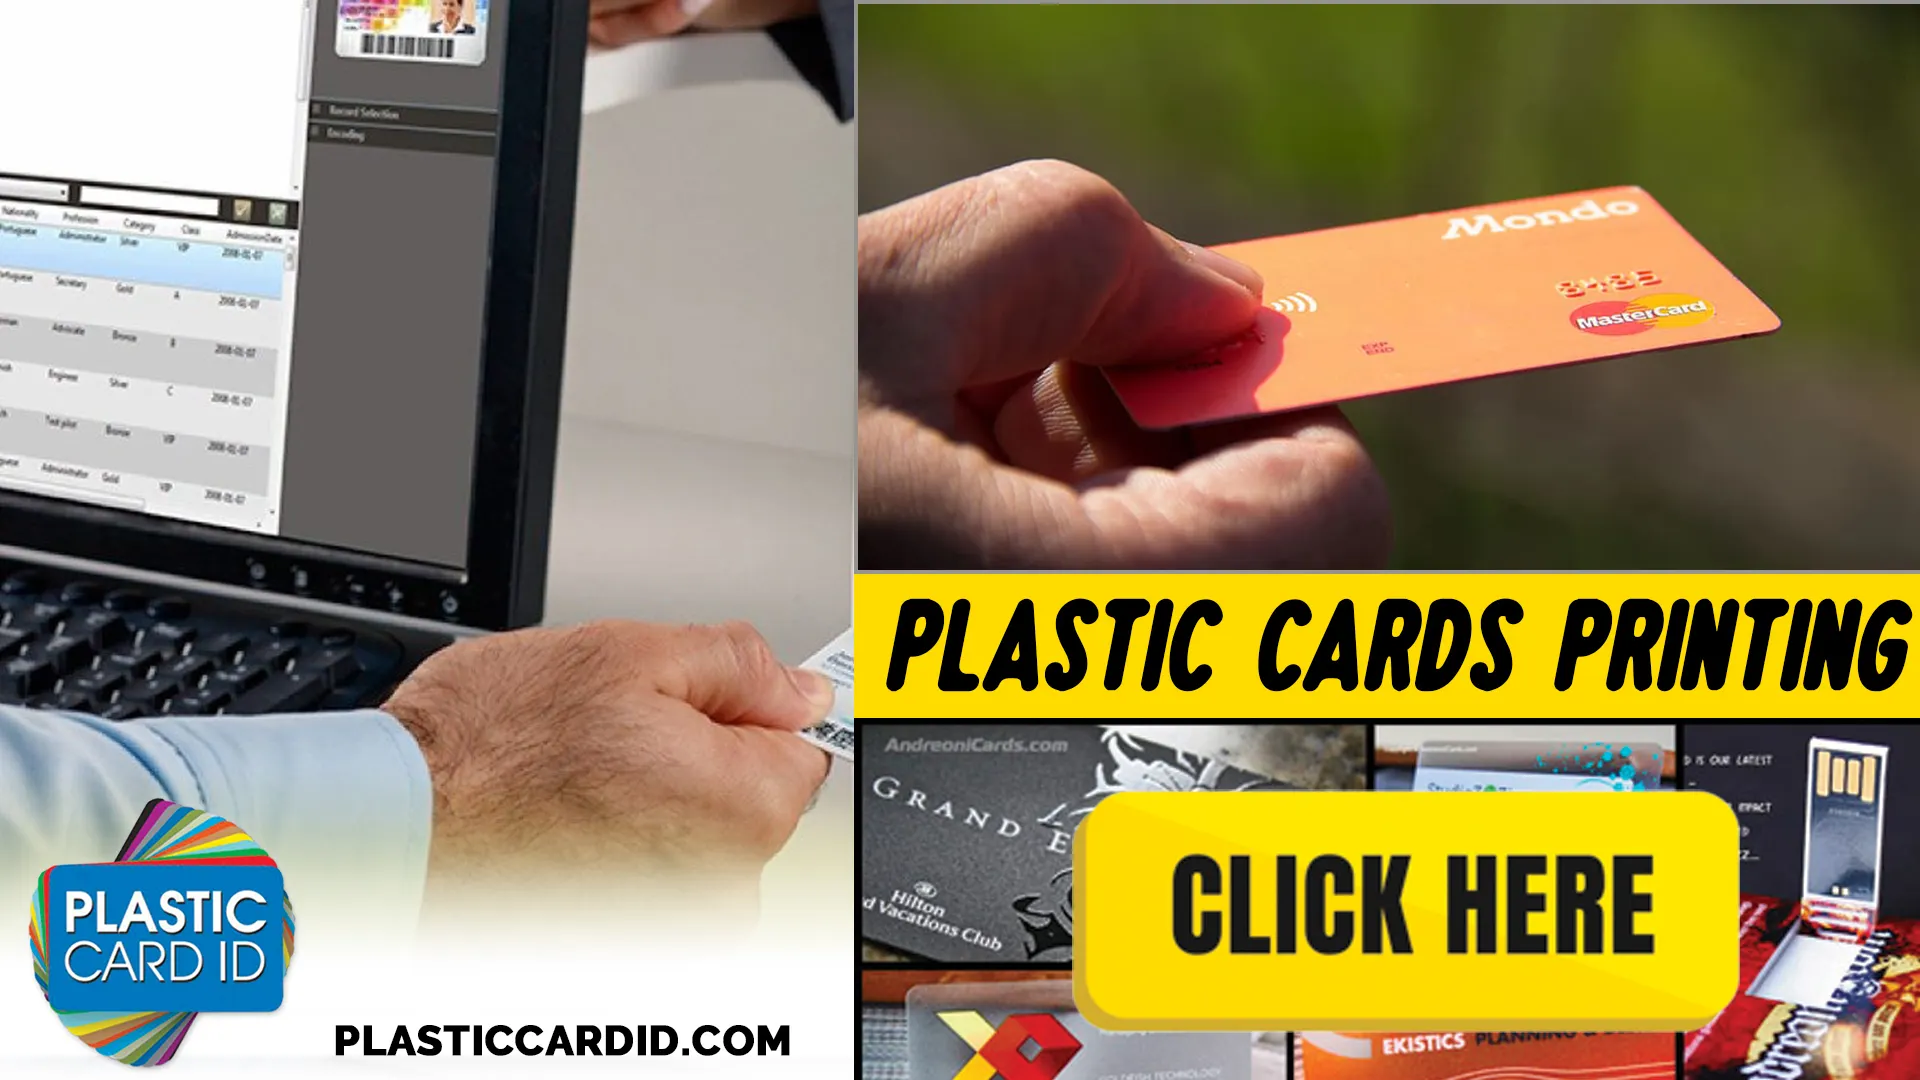 Welcome to the World of Innovative Event Marketing with Plastic Cards